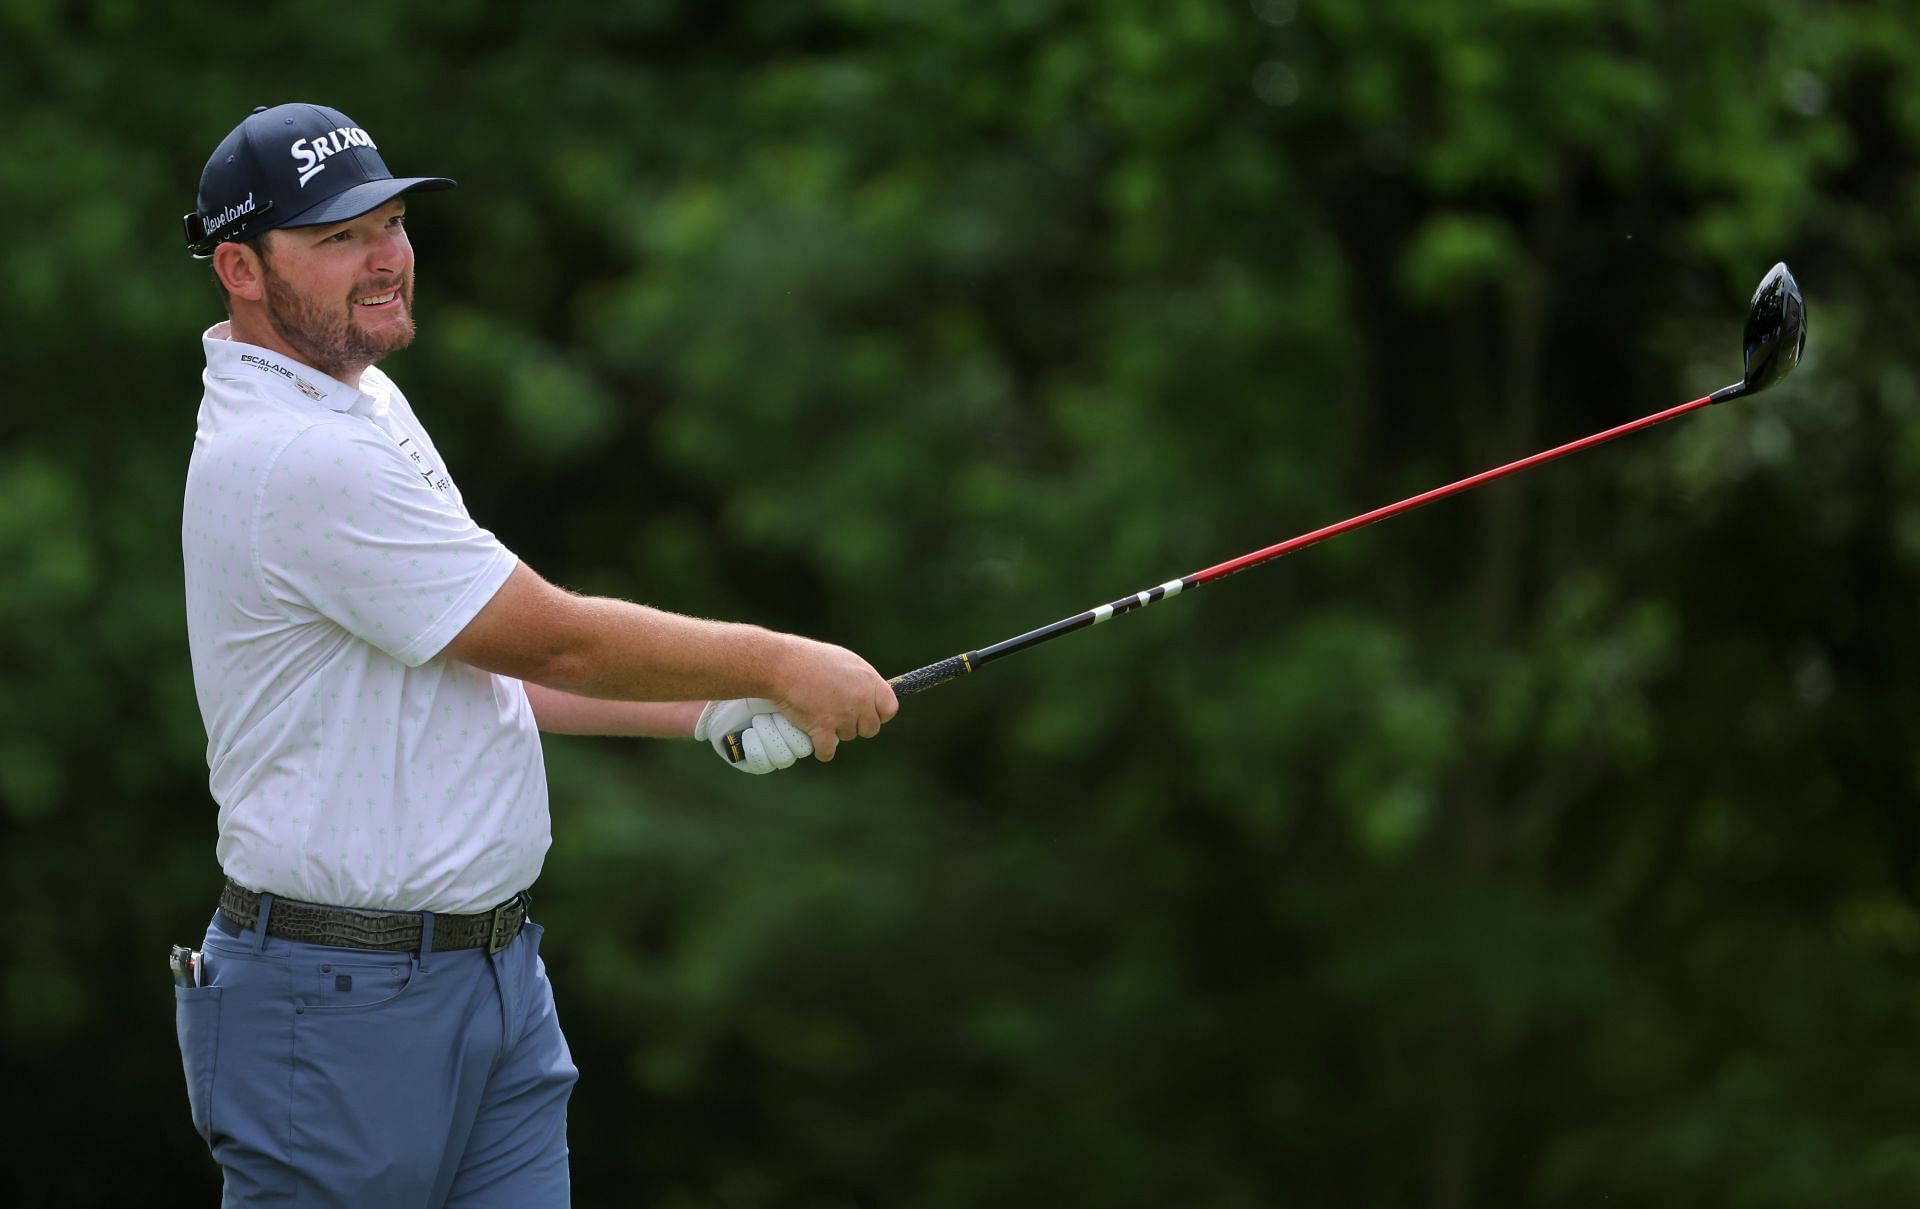 2023 Zurich Classic of New Orleans Day 2 leaderboard and highlights